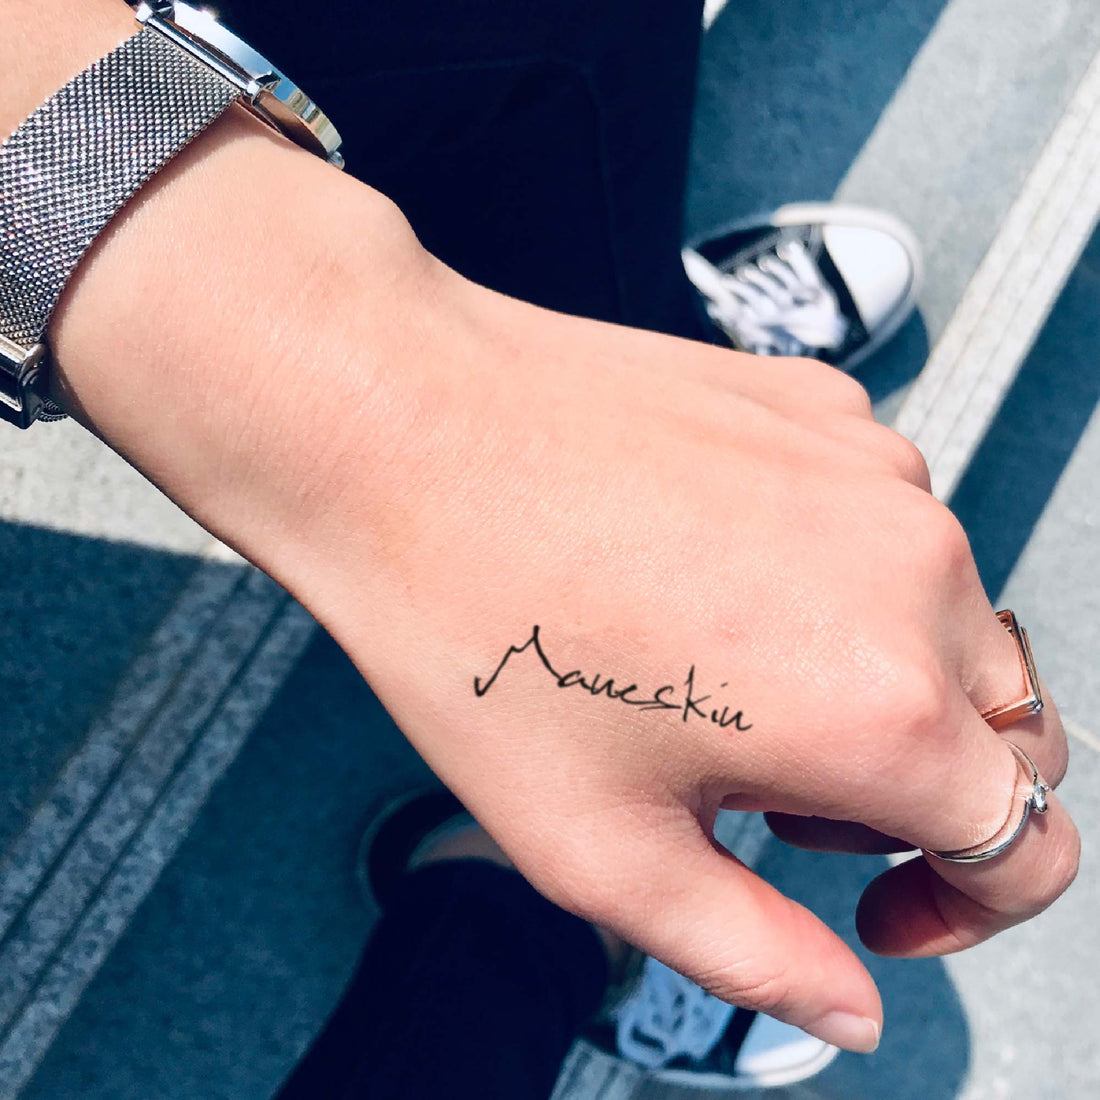 Maneskin custom temporary tattoo sticker design idea inspiration meanings removal arm wrist hand words font name signature calligraphy lyrics tour concert outfits merch accessory gift souvenir costumes wear dress up code